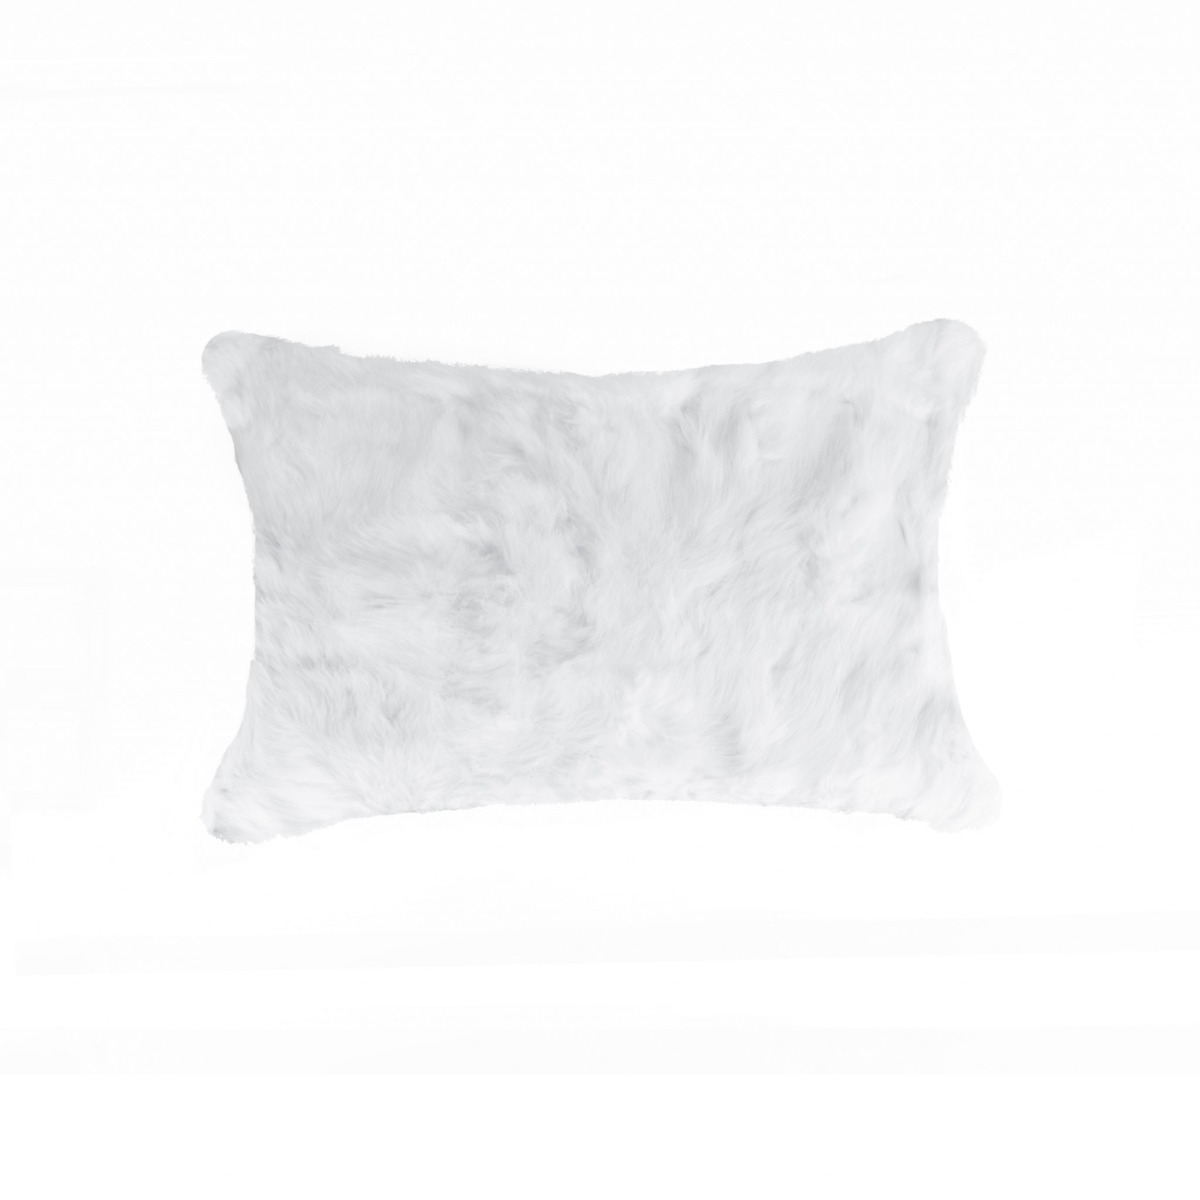 Picture of HomeRoots 358160 5 x 12 x 20 in. 100 Percent Natural Rabbit Fur White Pillow